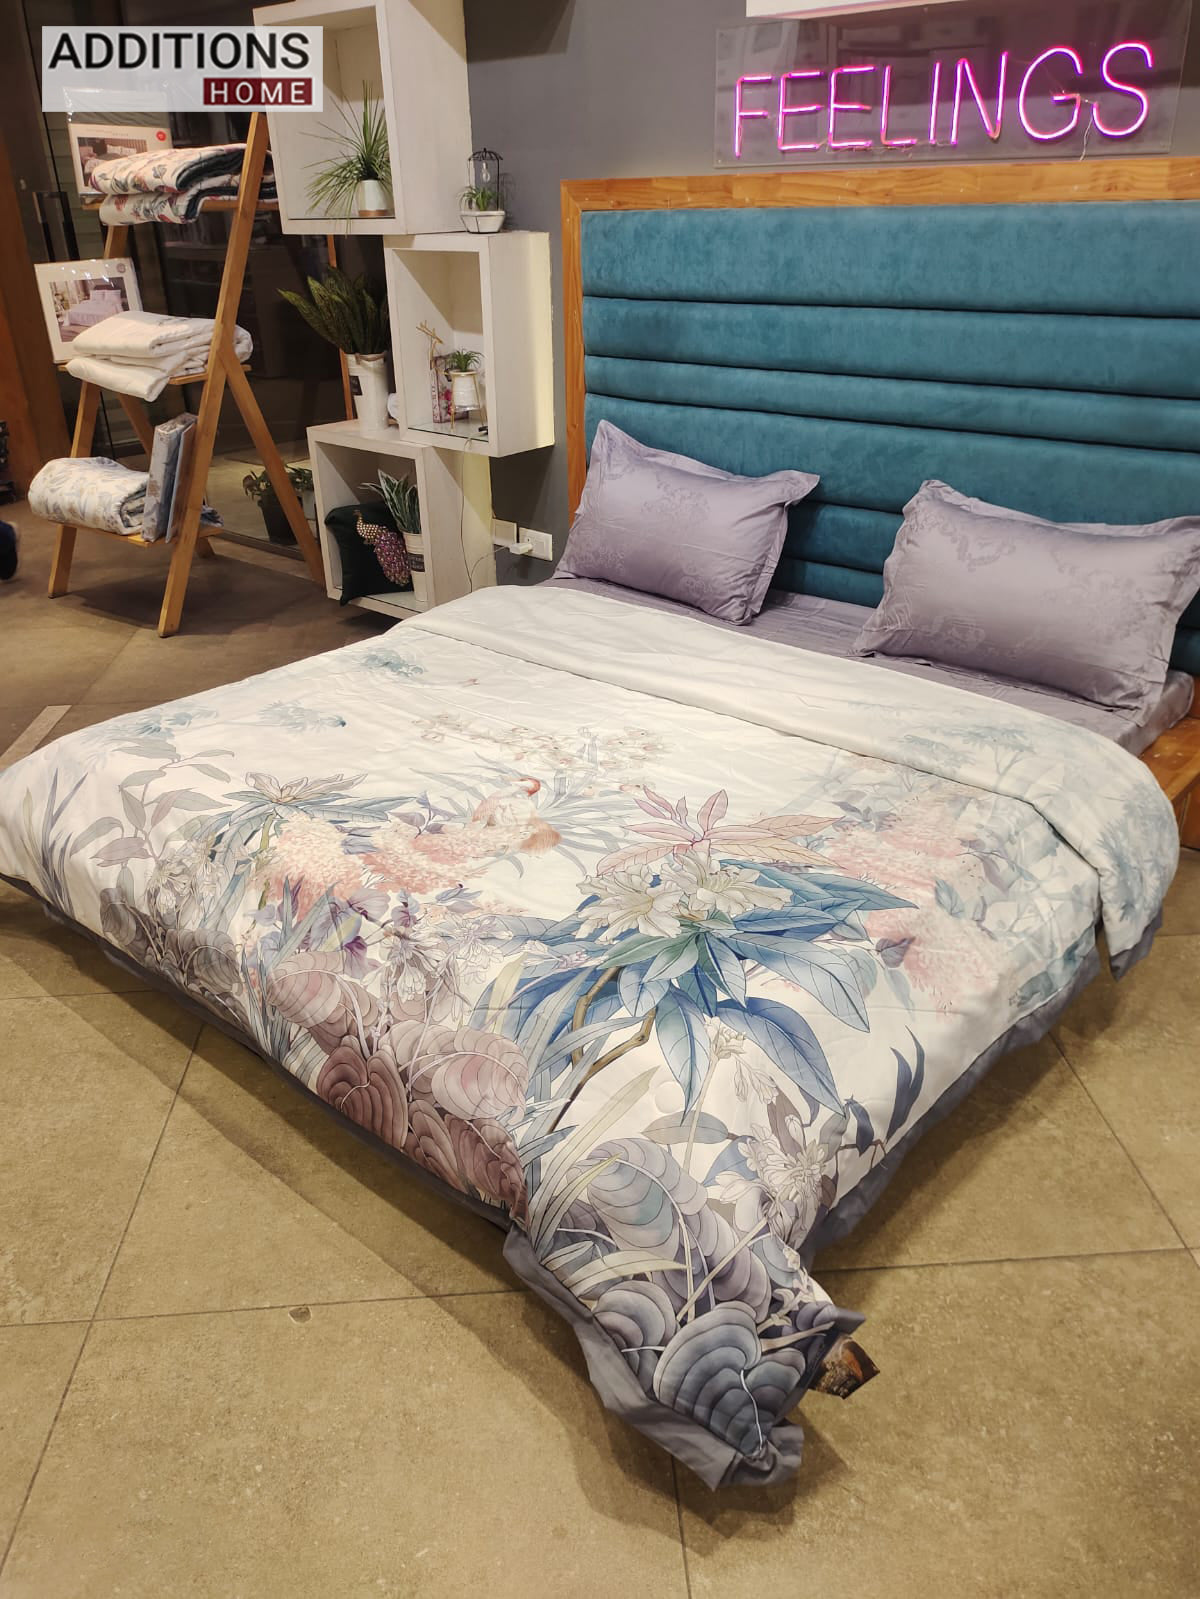 Digitally printed Double Bed Comforter For All Seasons.